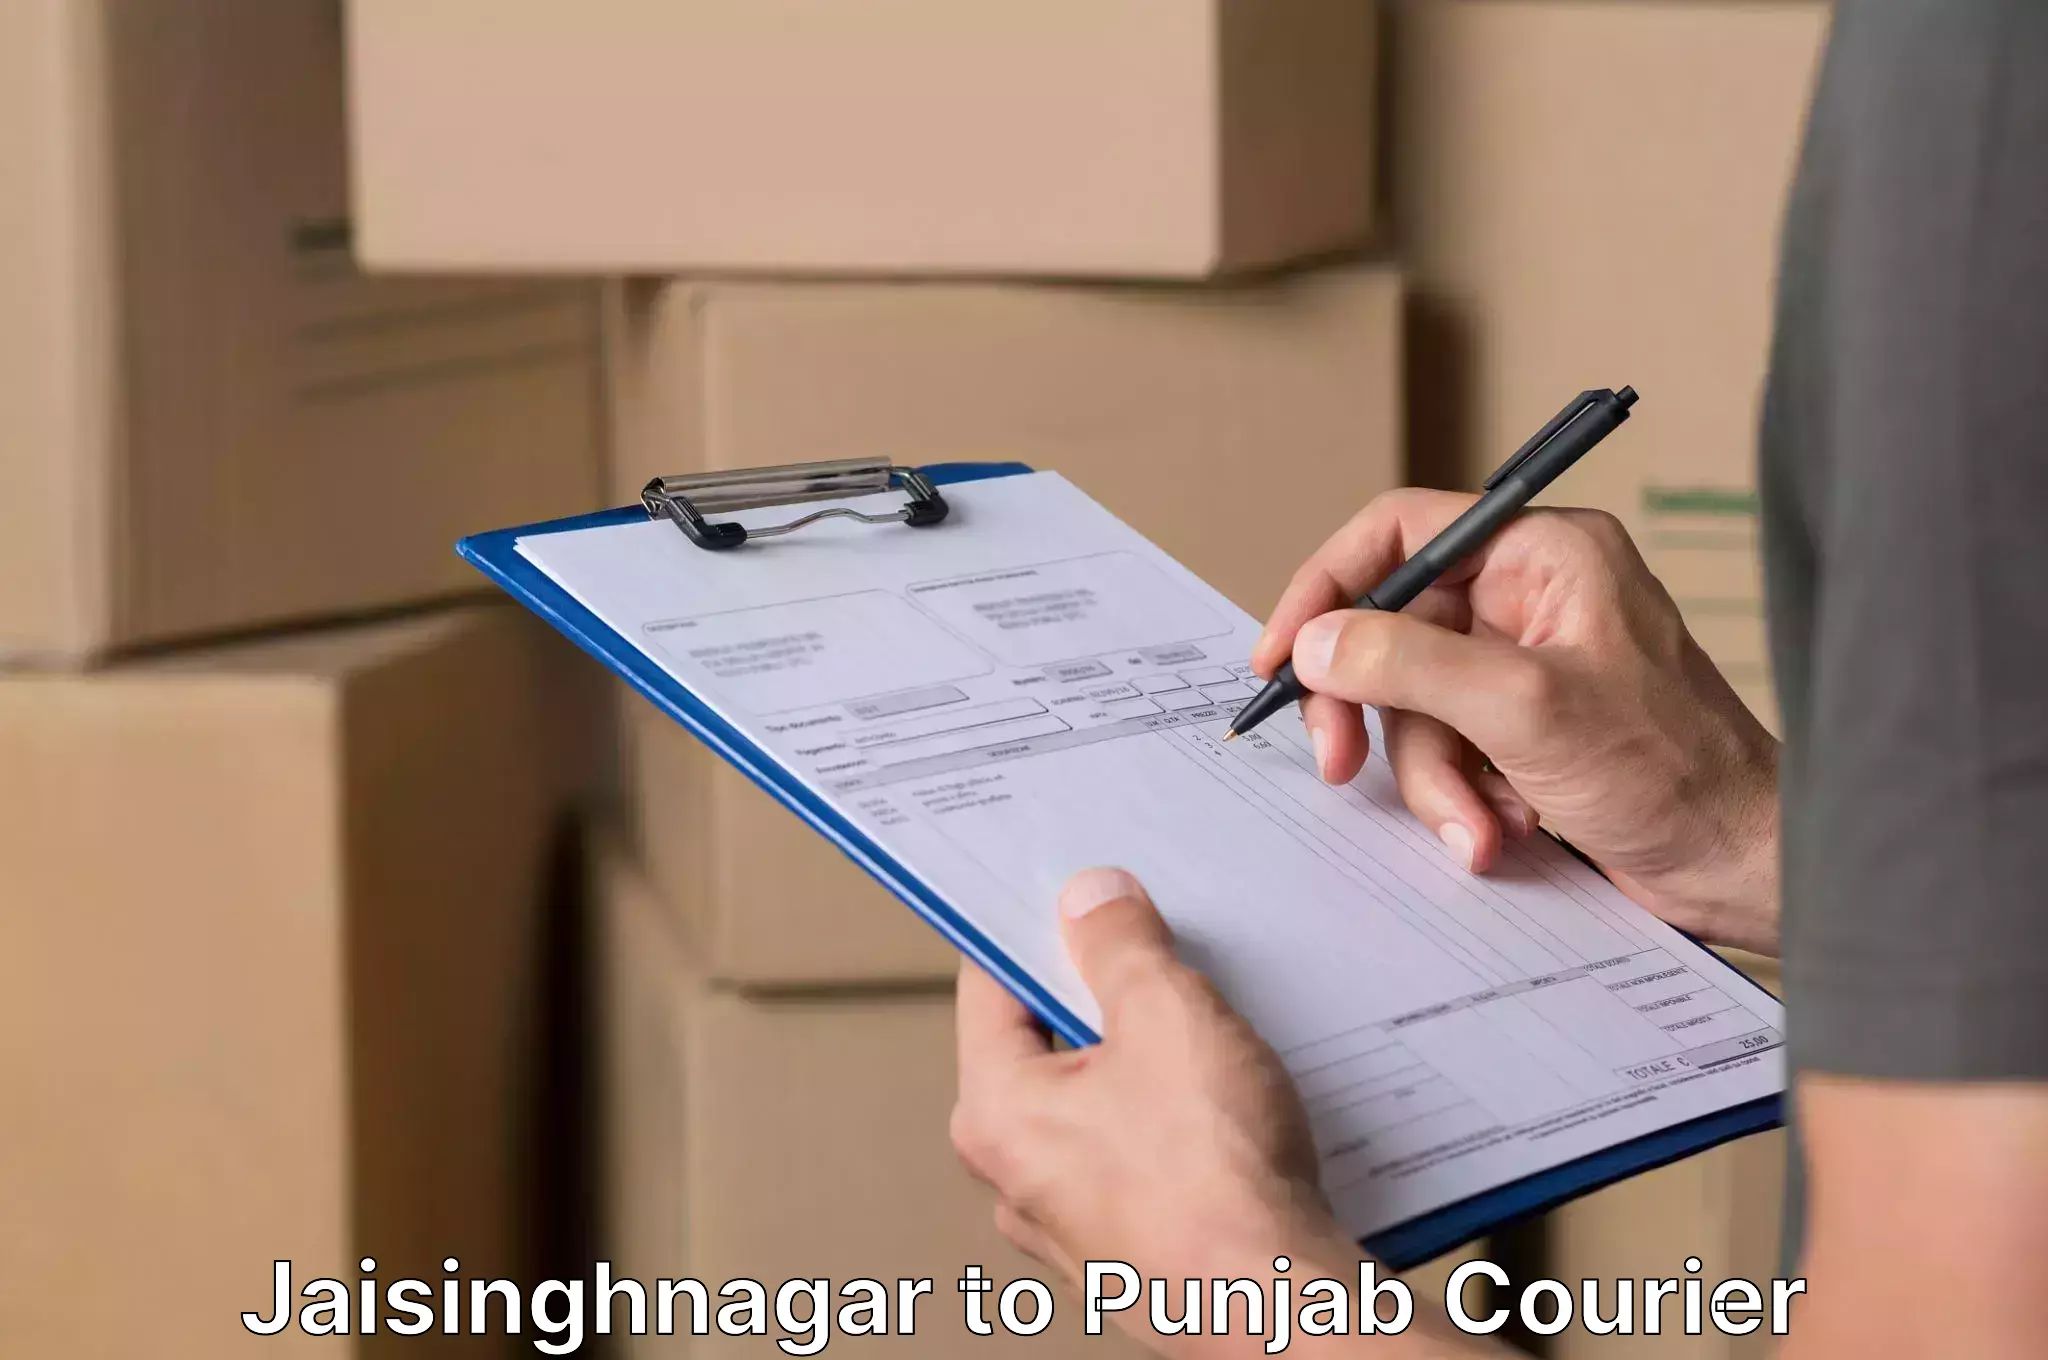 Furniture relocation experts Jaisinghnagar to Malout